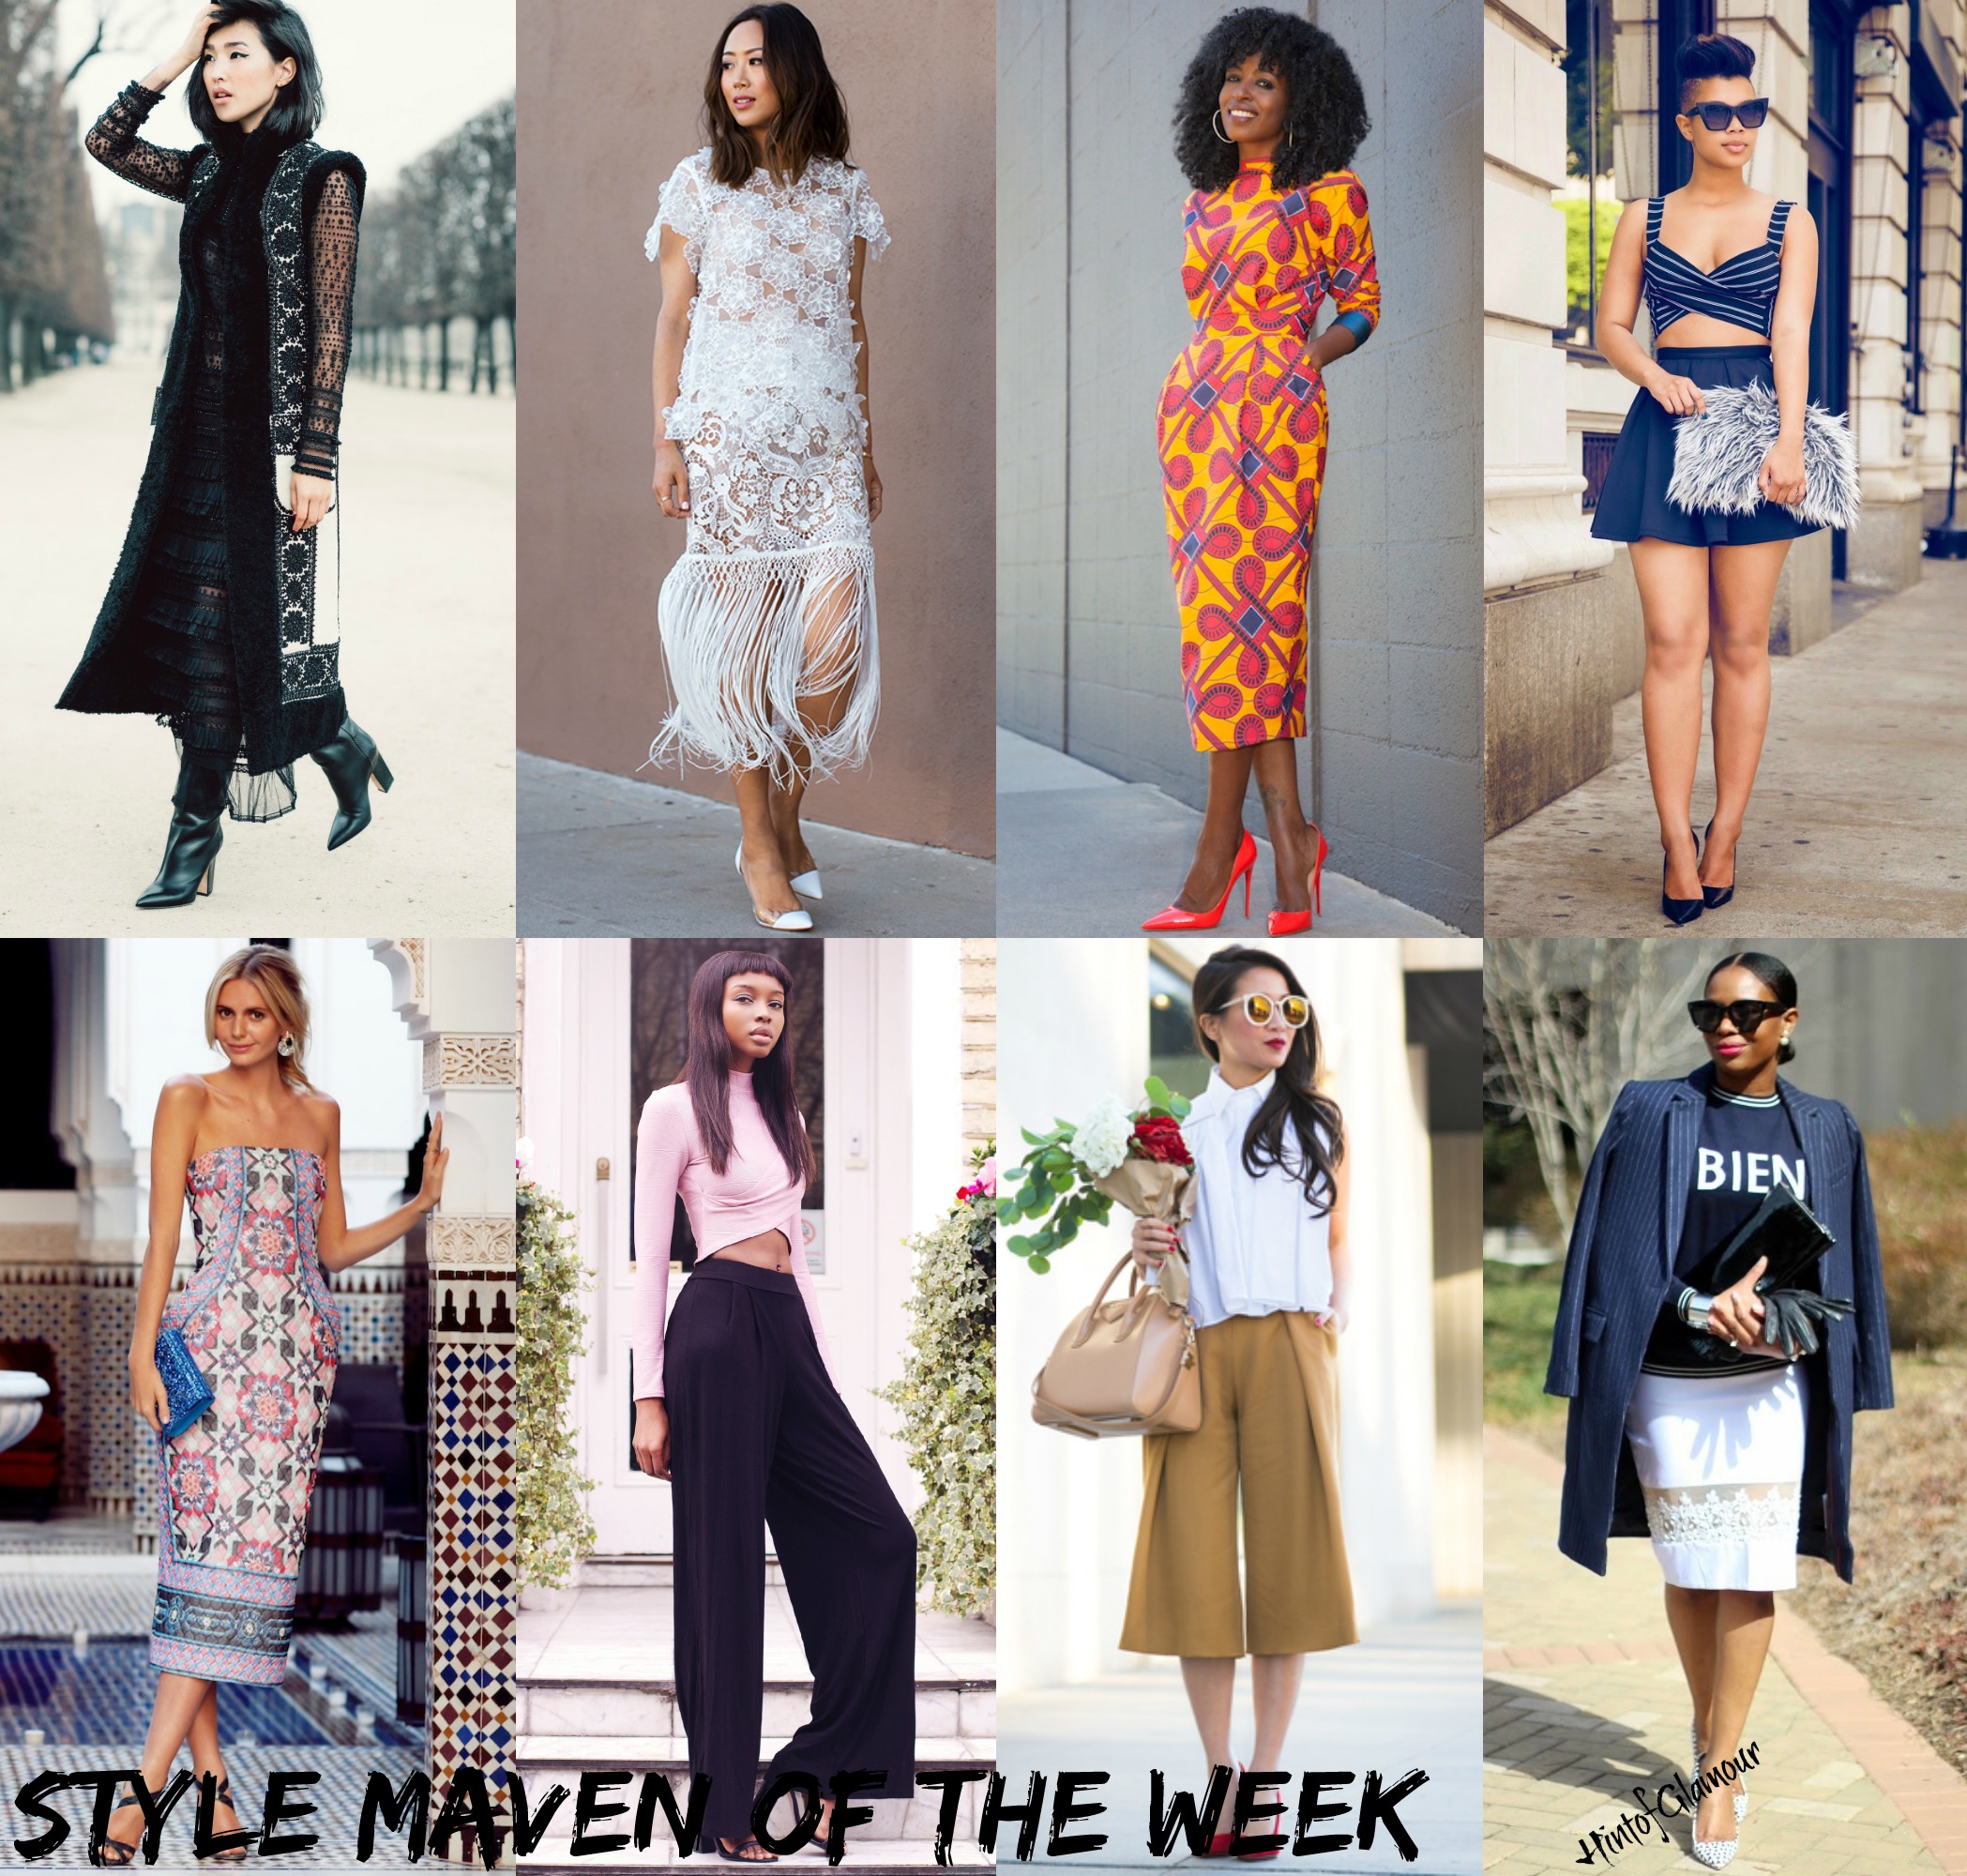 4-20-15 Style Maven of the Week